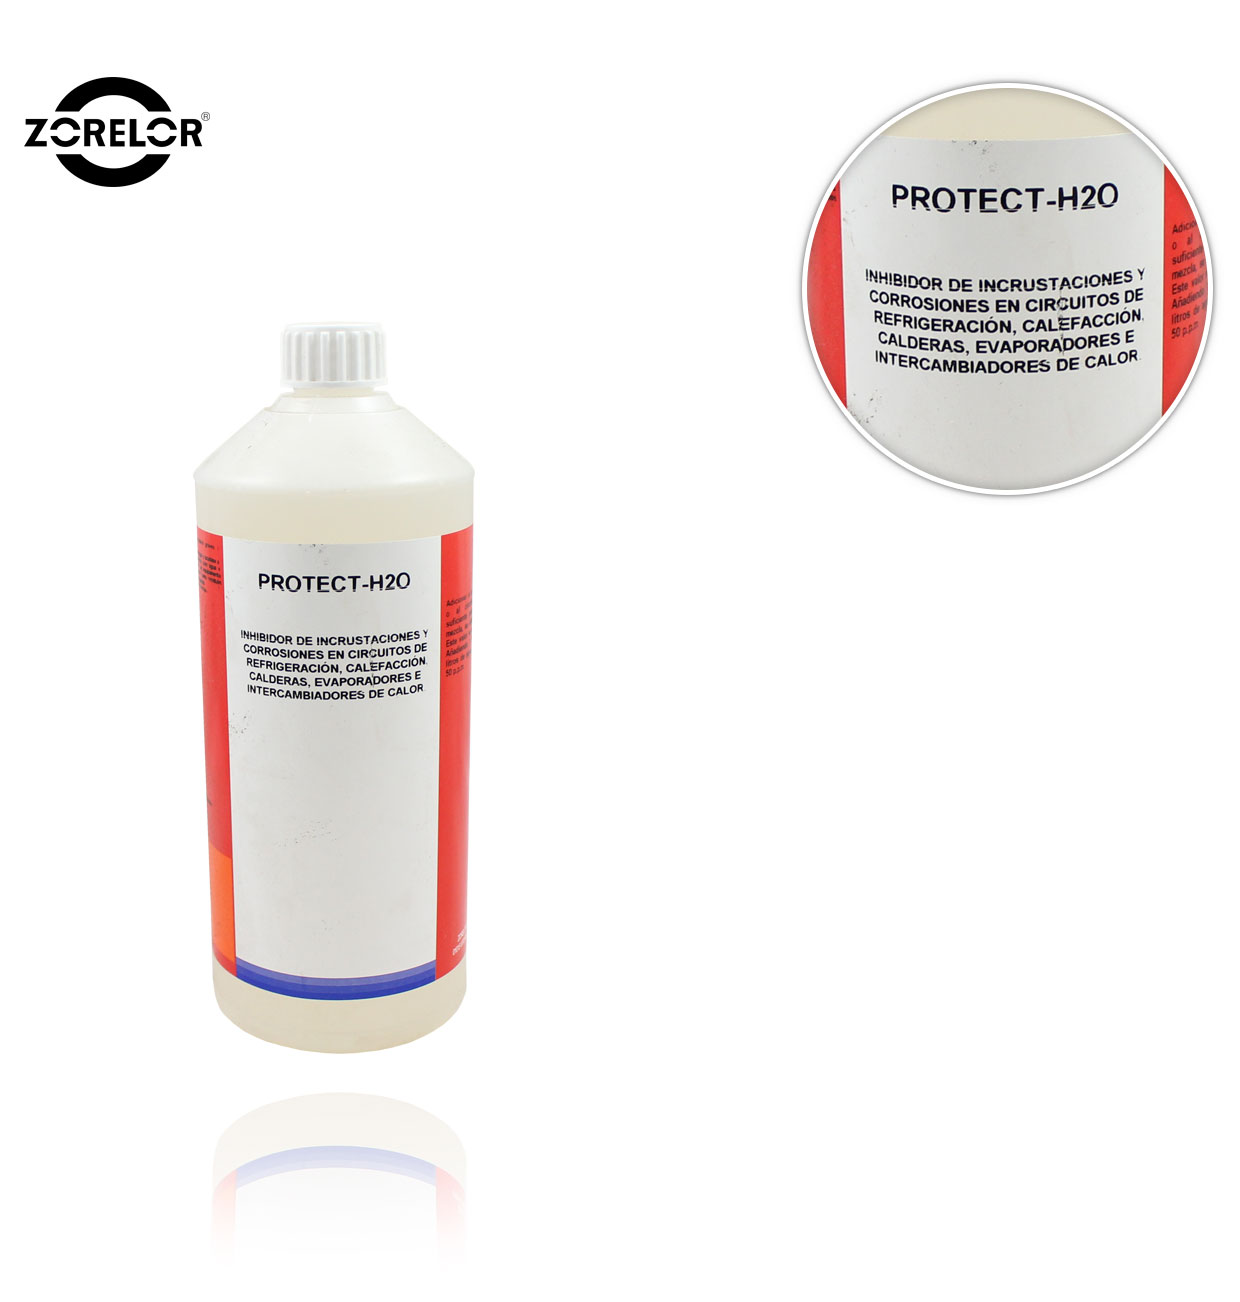 1L BOTTLE PROTEC-H2O ANTI-CORROSIVE AND ANTI-SCALING